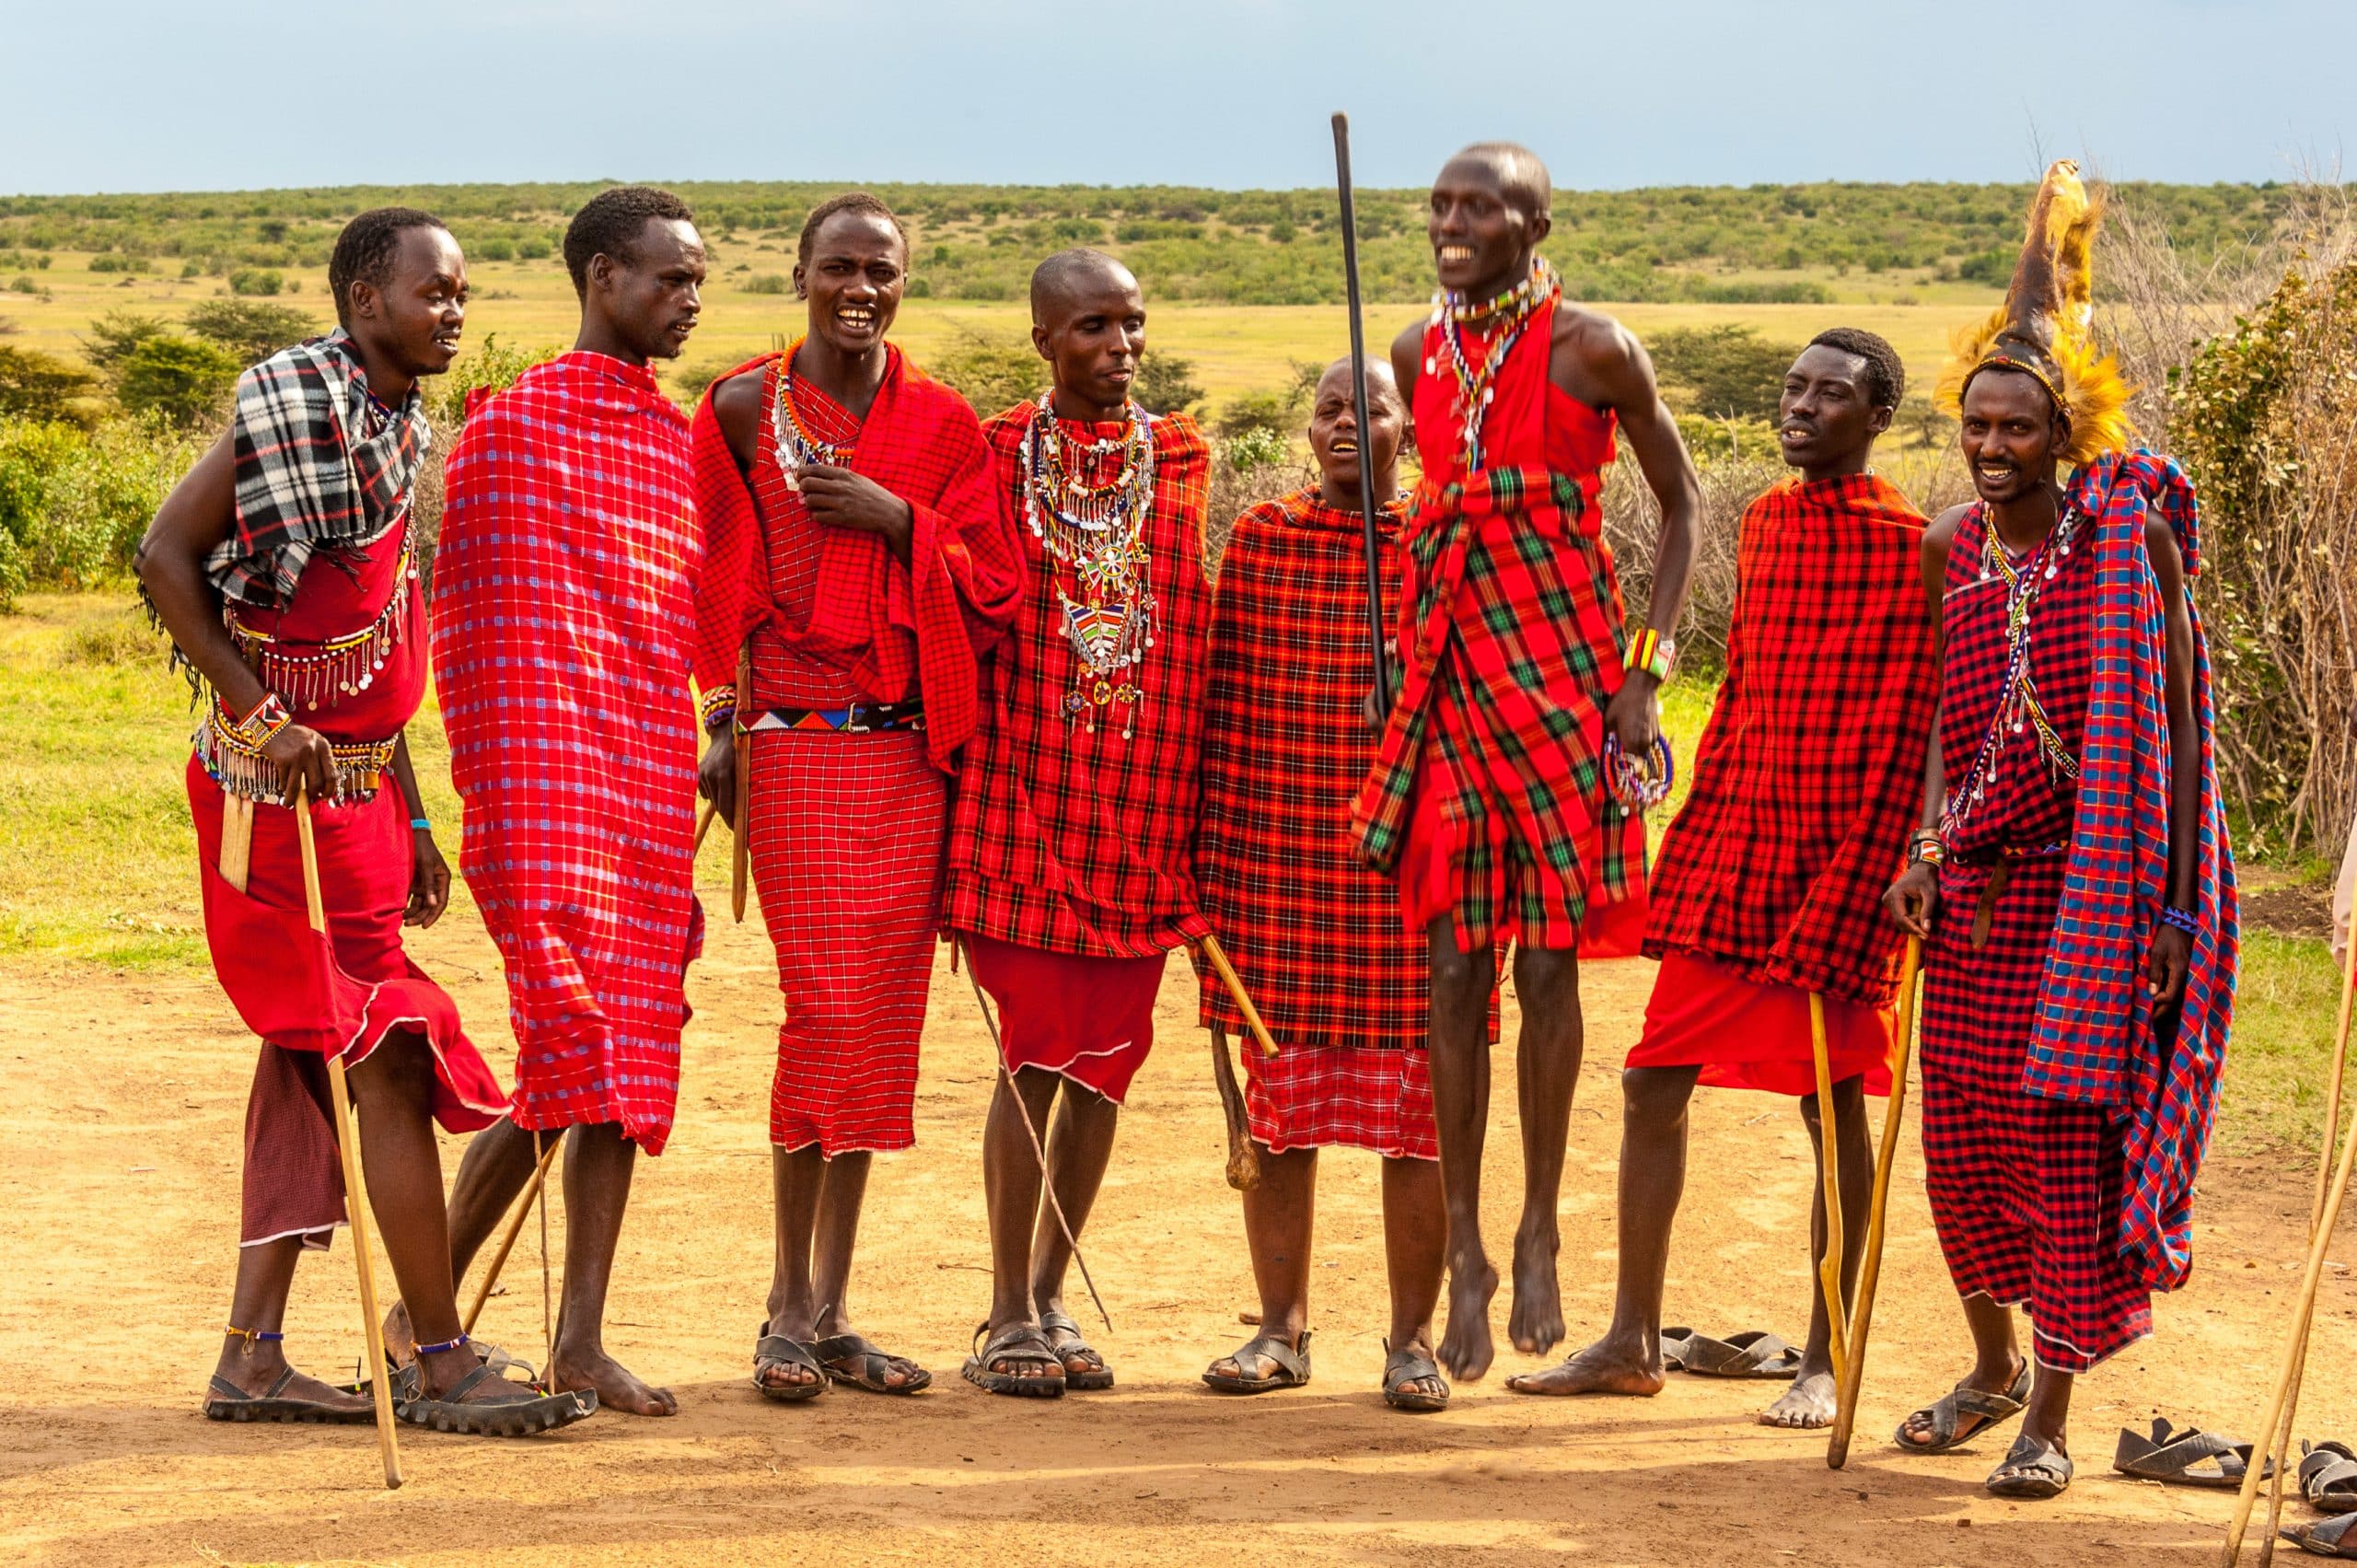 Maasai couple (warrior and girl) in traditional clothing. Africa